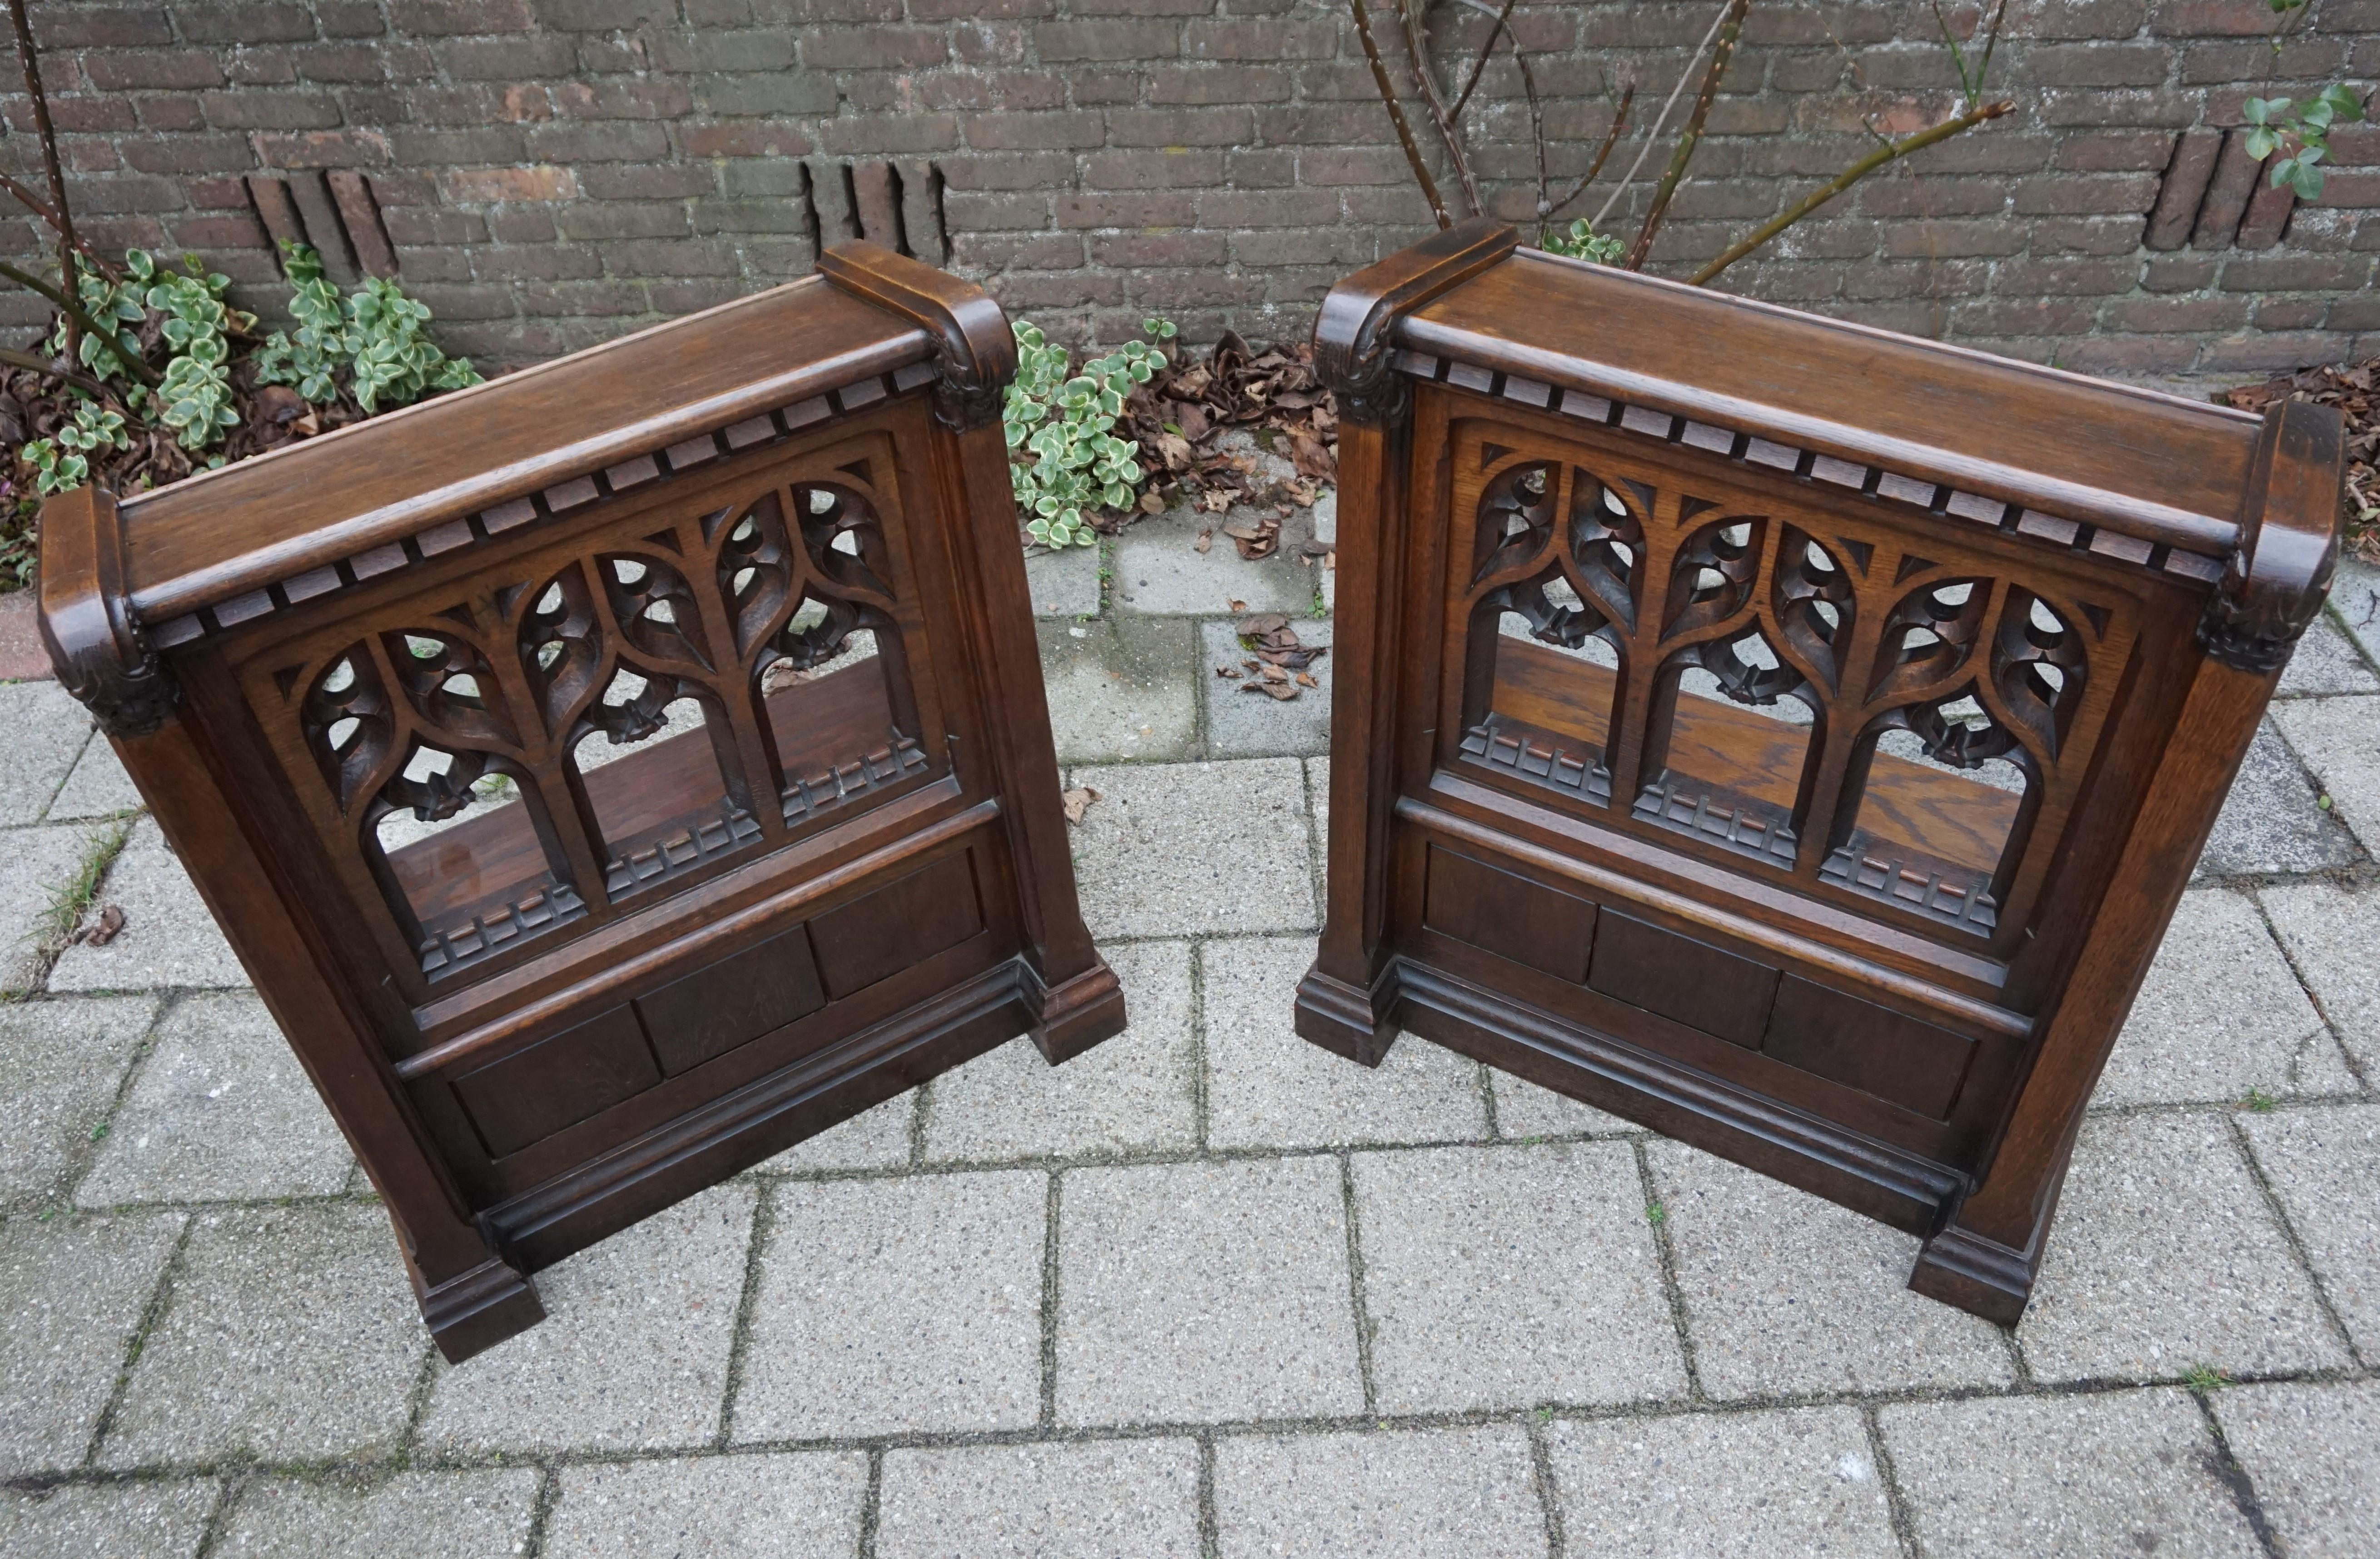 Pair of Hand Carved Gothic Revival Oak Church Lectern Desks with Bookshelf 1